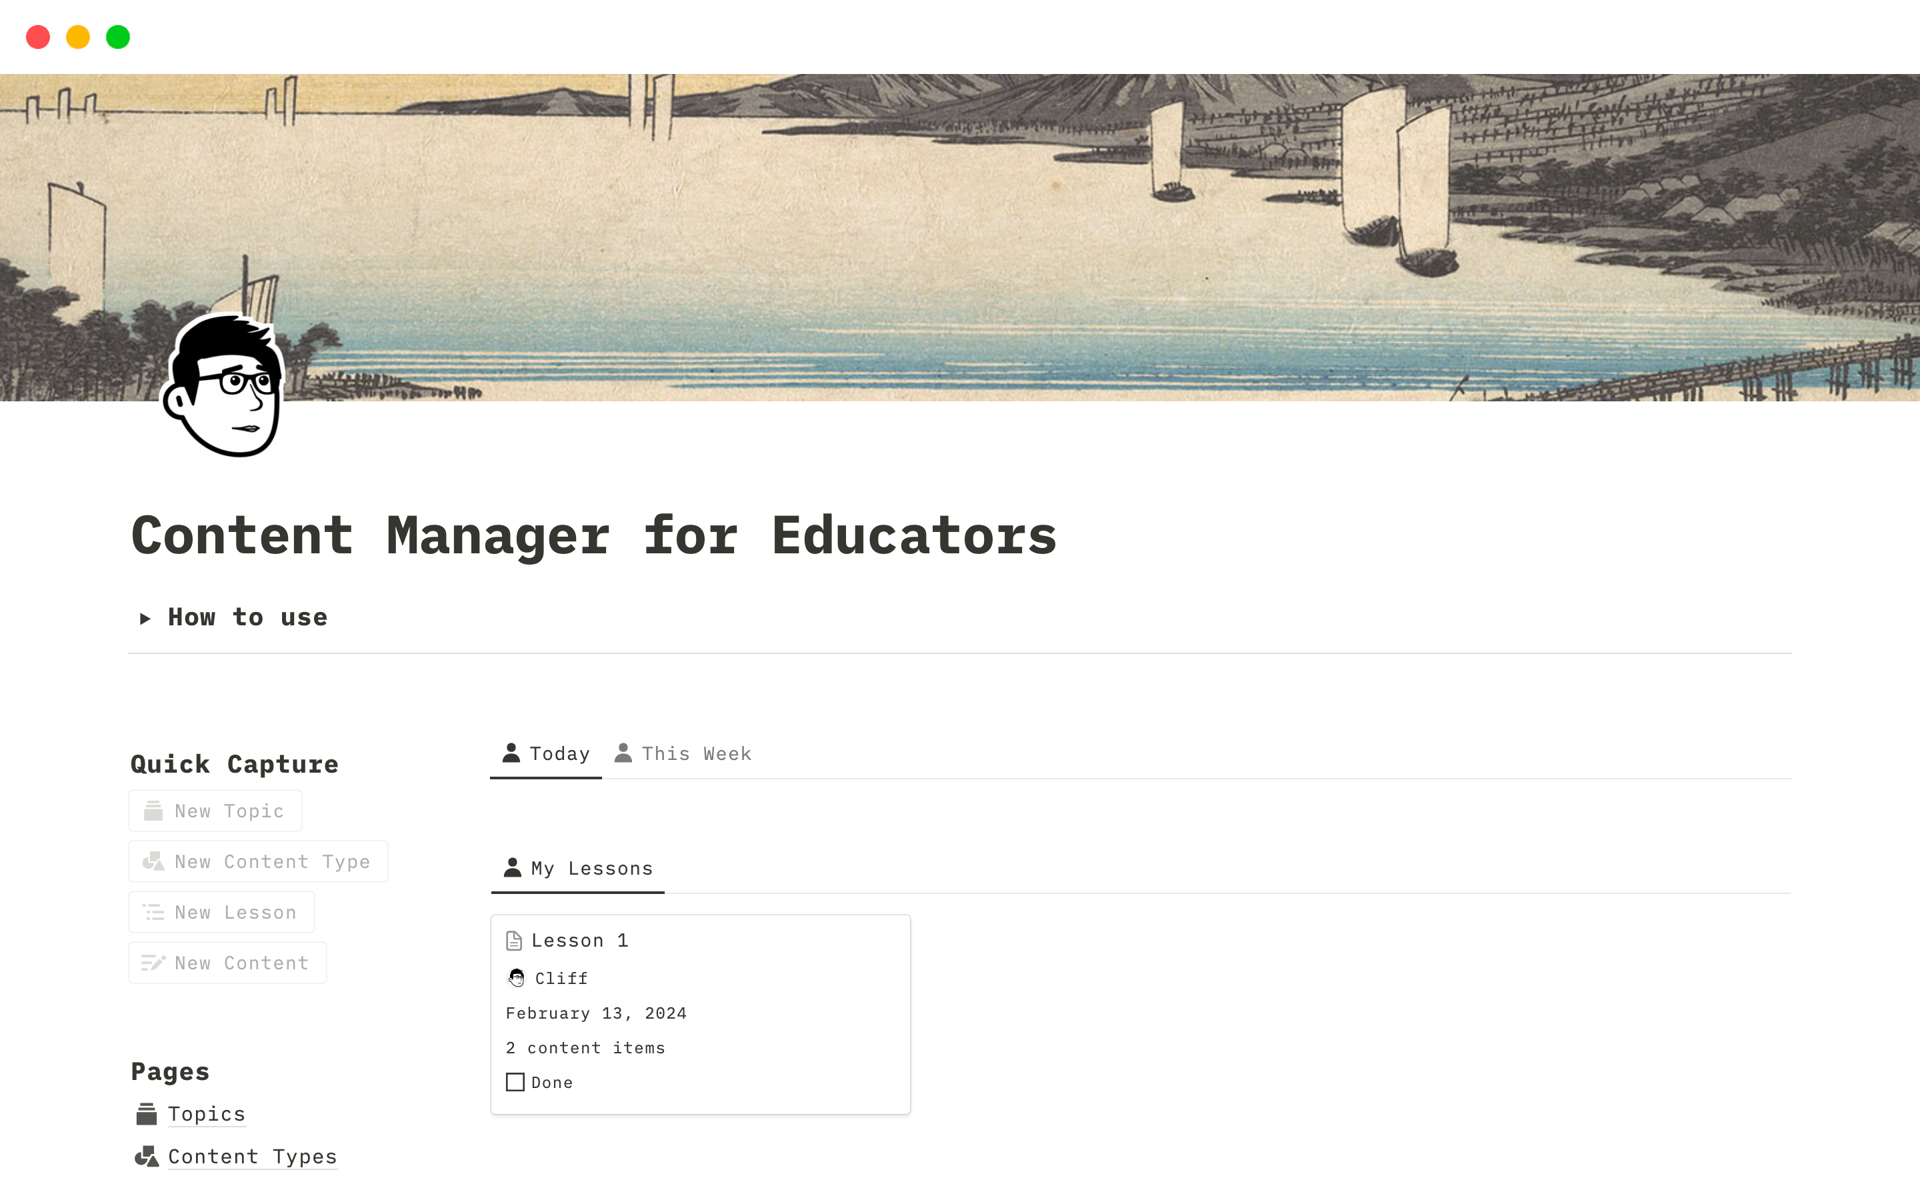 The Content Manager for Educators Notion template helps you to keep track of your work and organize all of your educational content in one place!